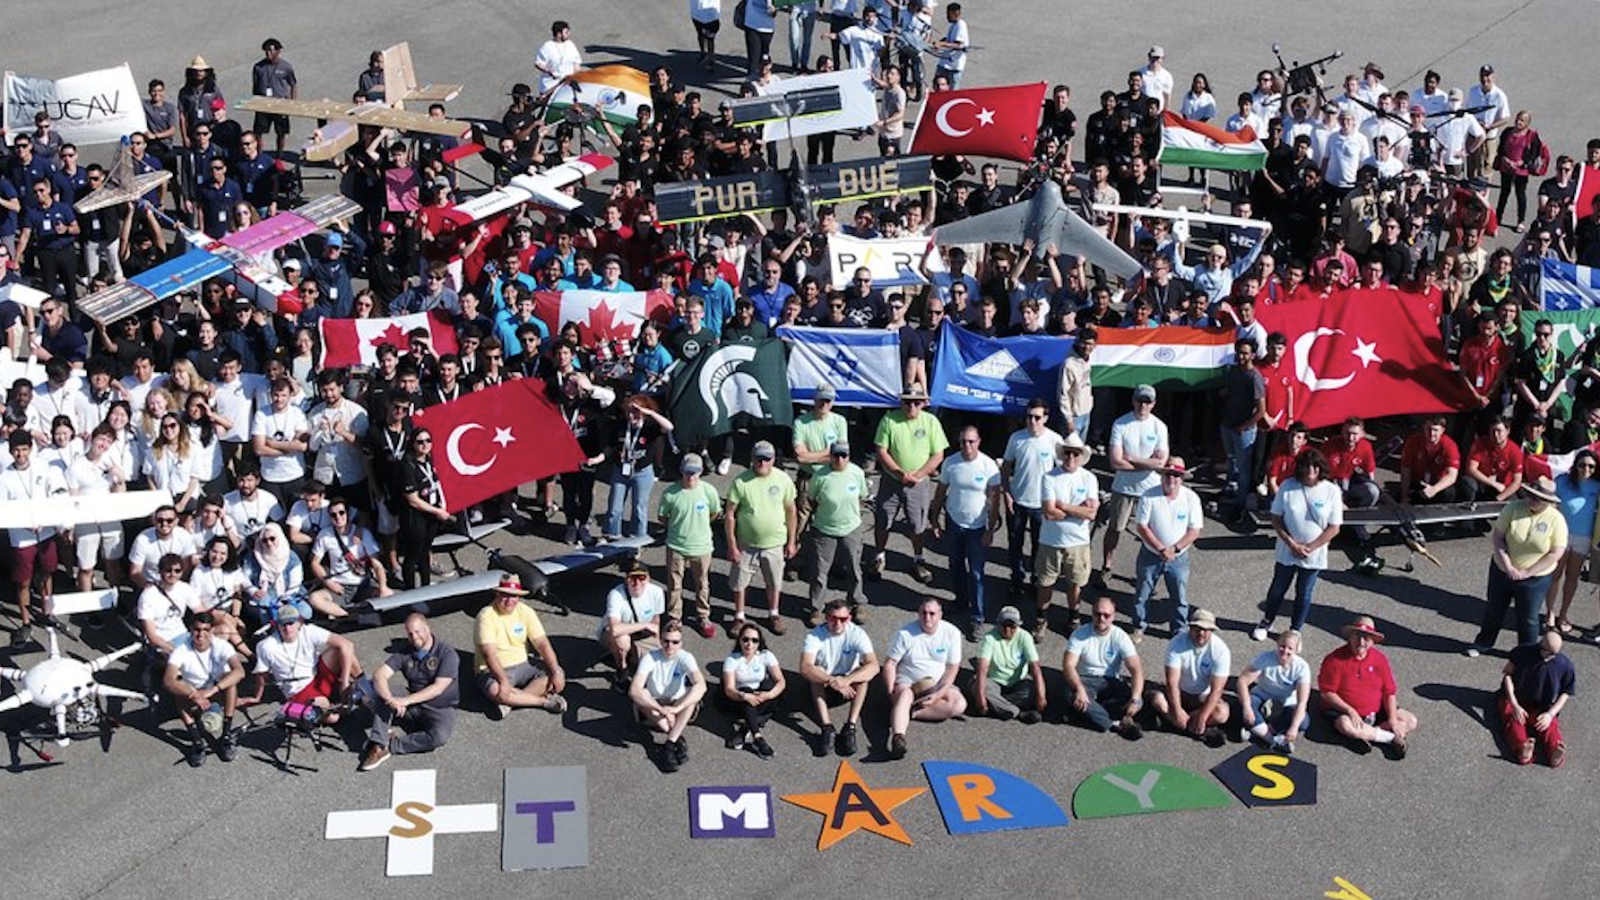 Teams representing a variety of nations pose for a group photo taken from above.